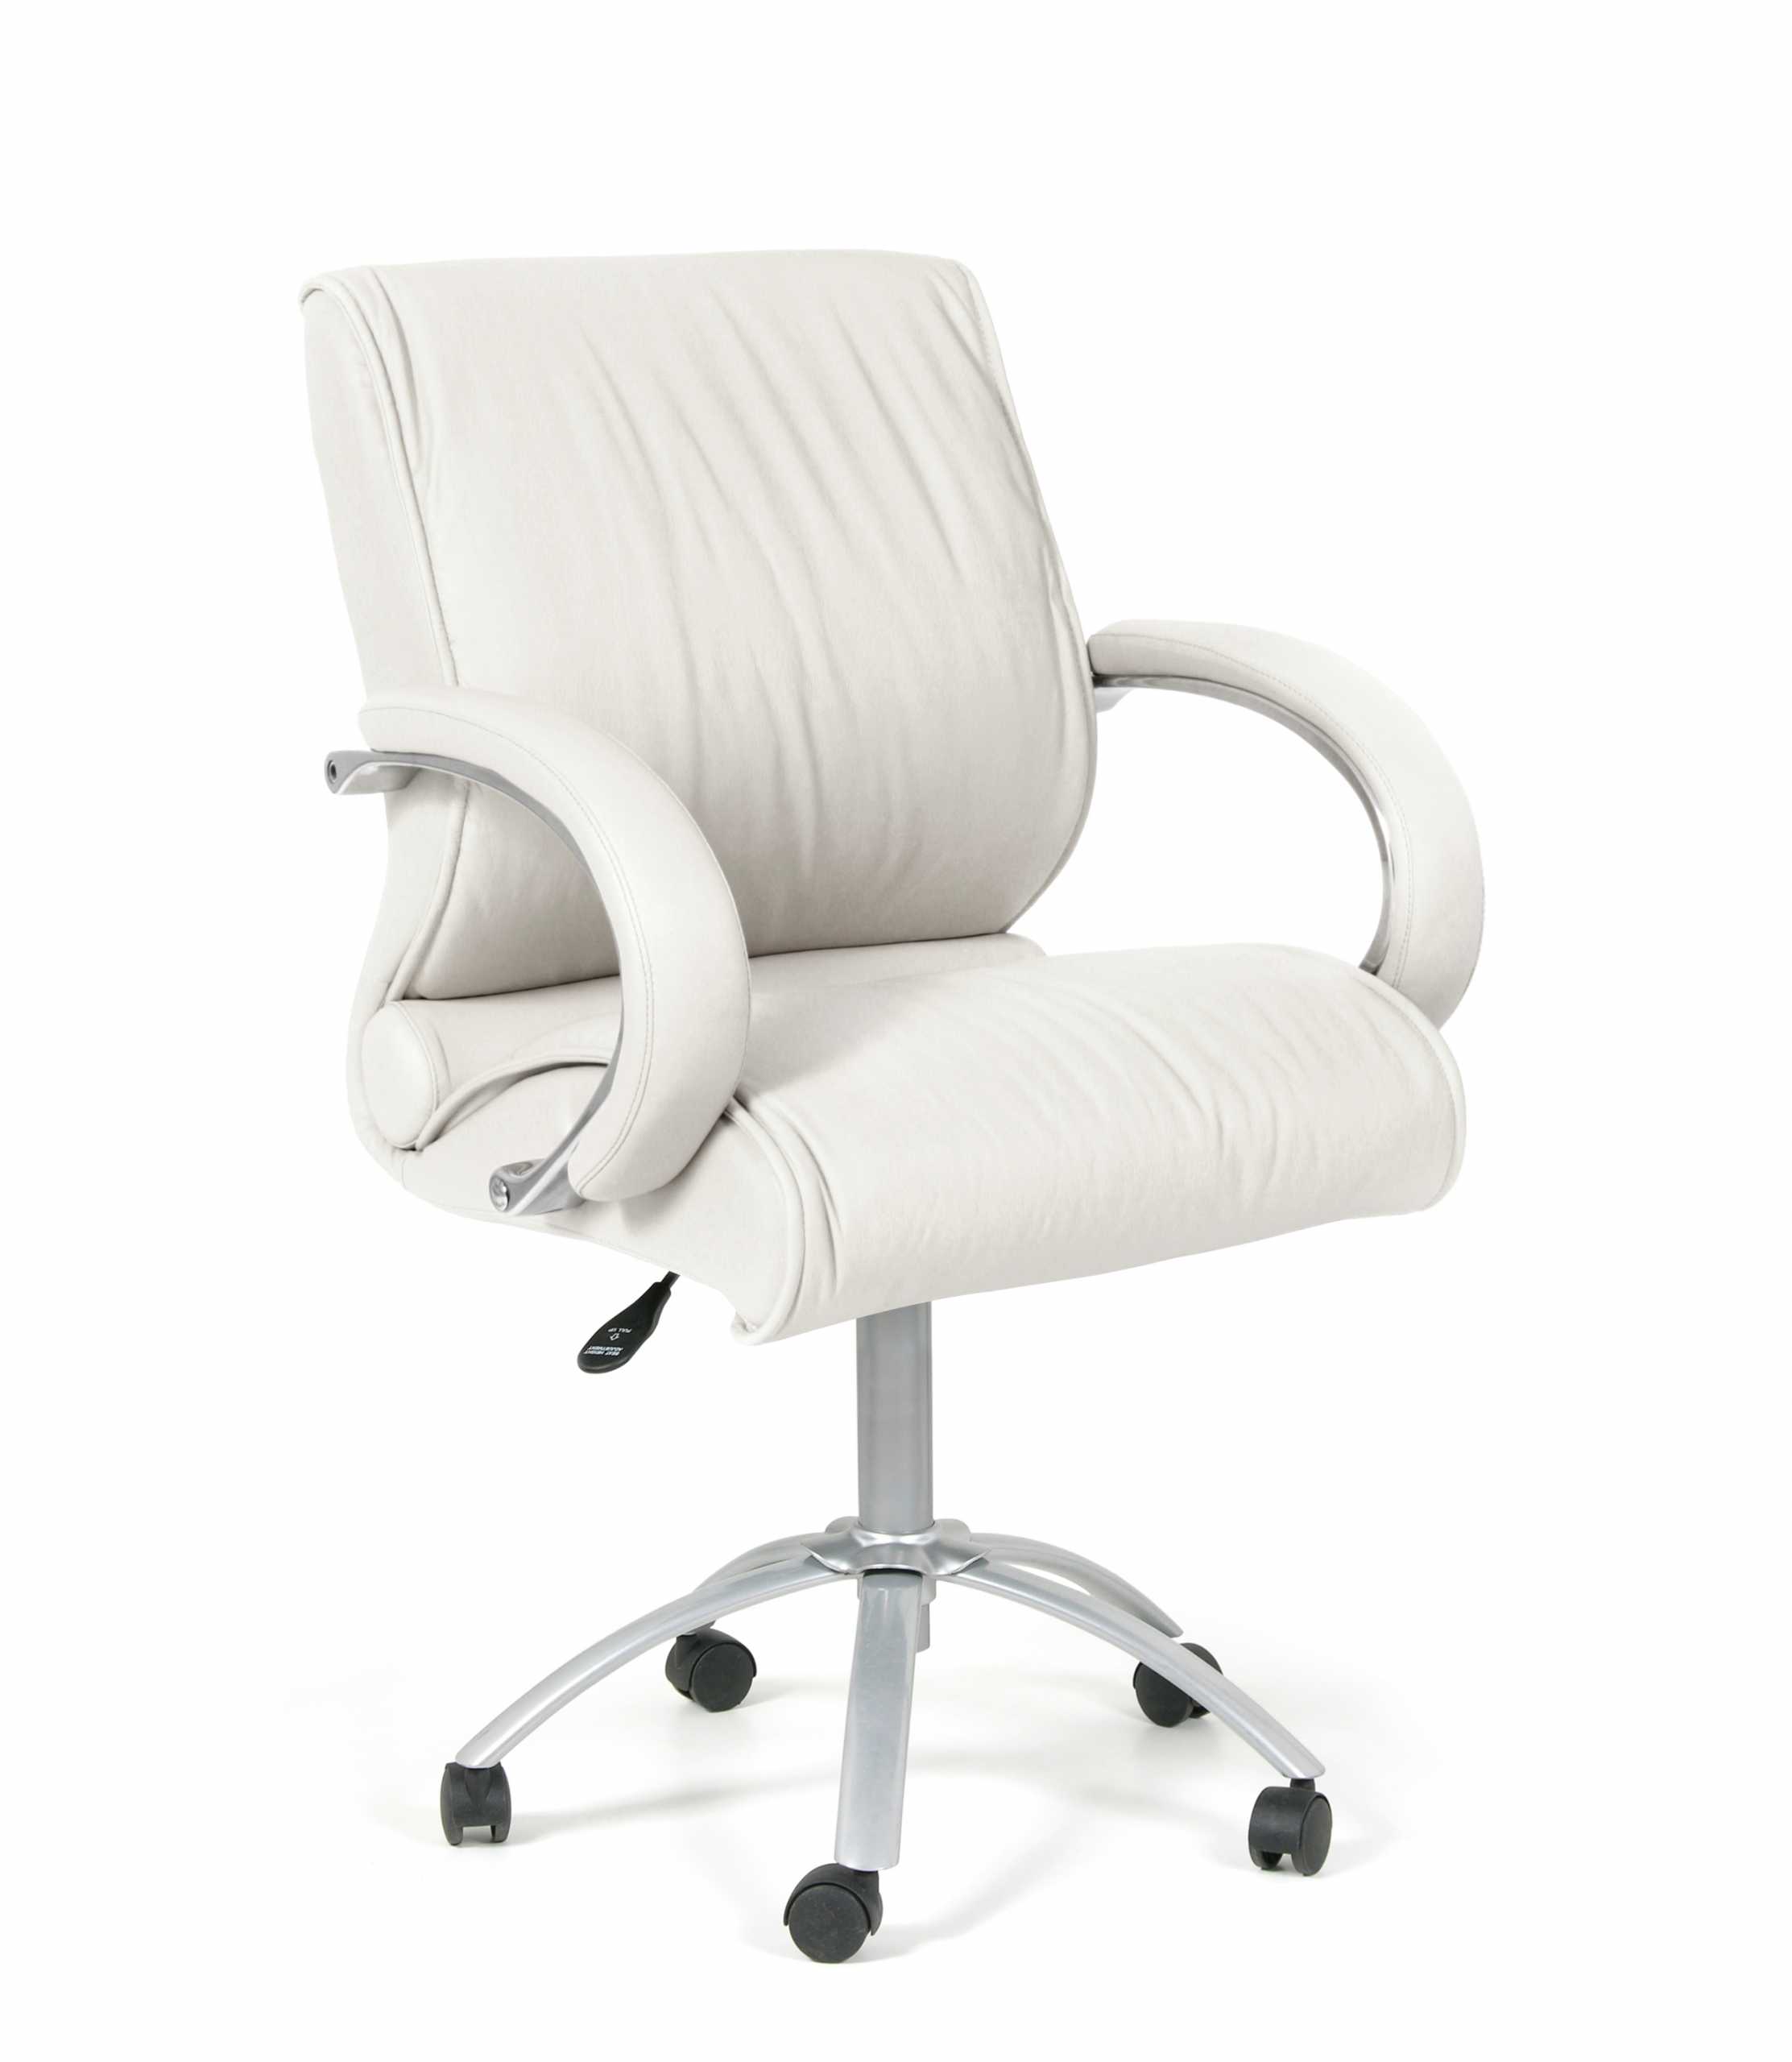 The Office Chair From White Leather Scaled 